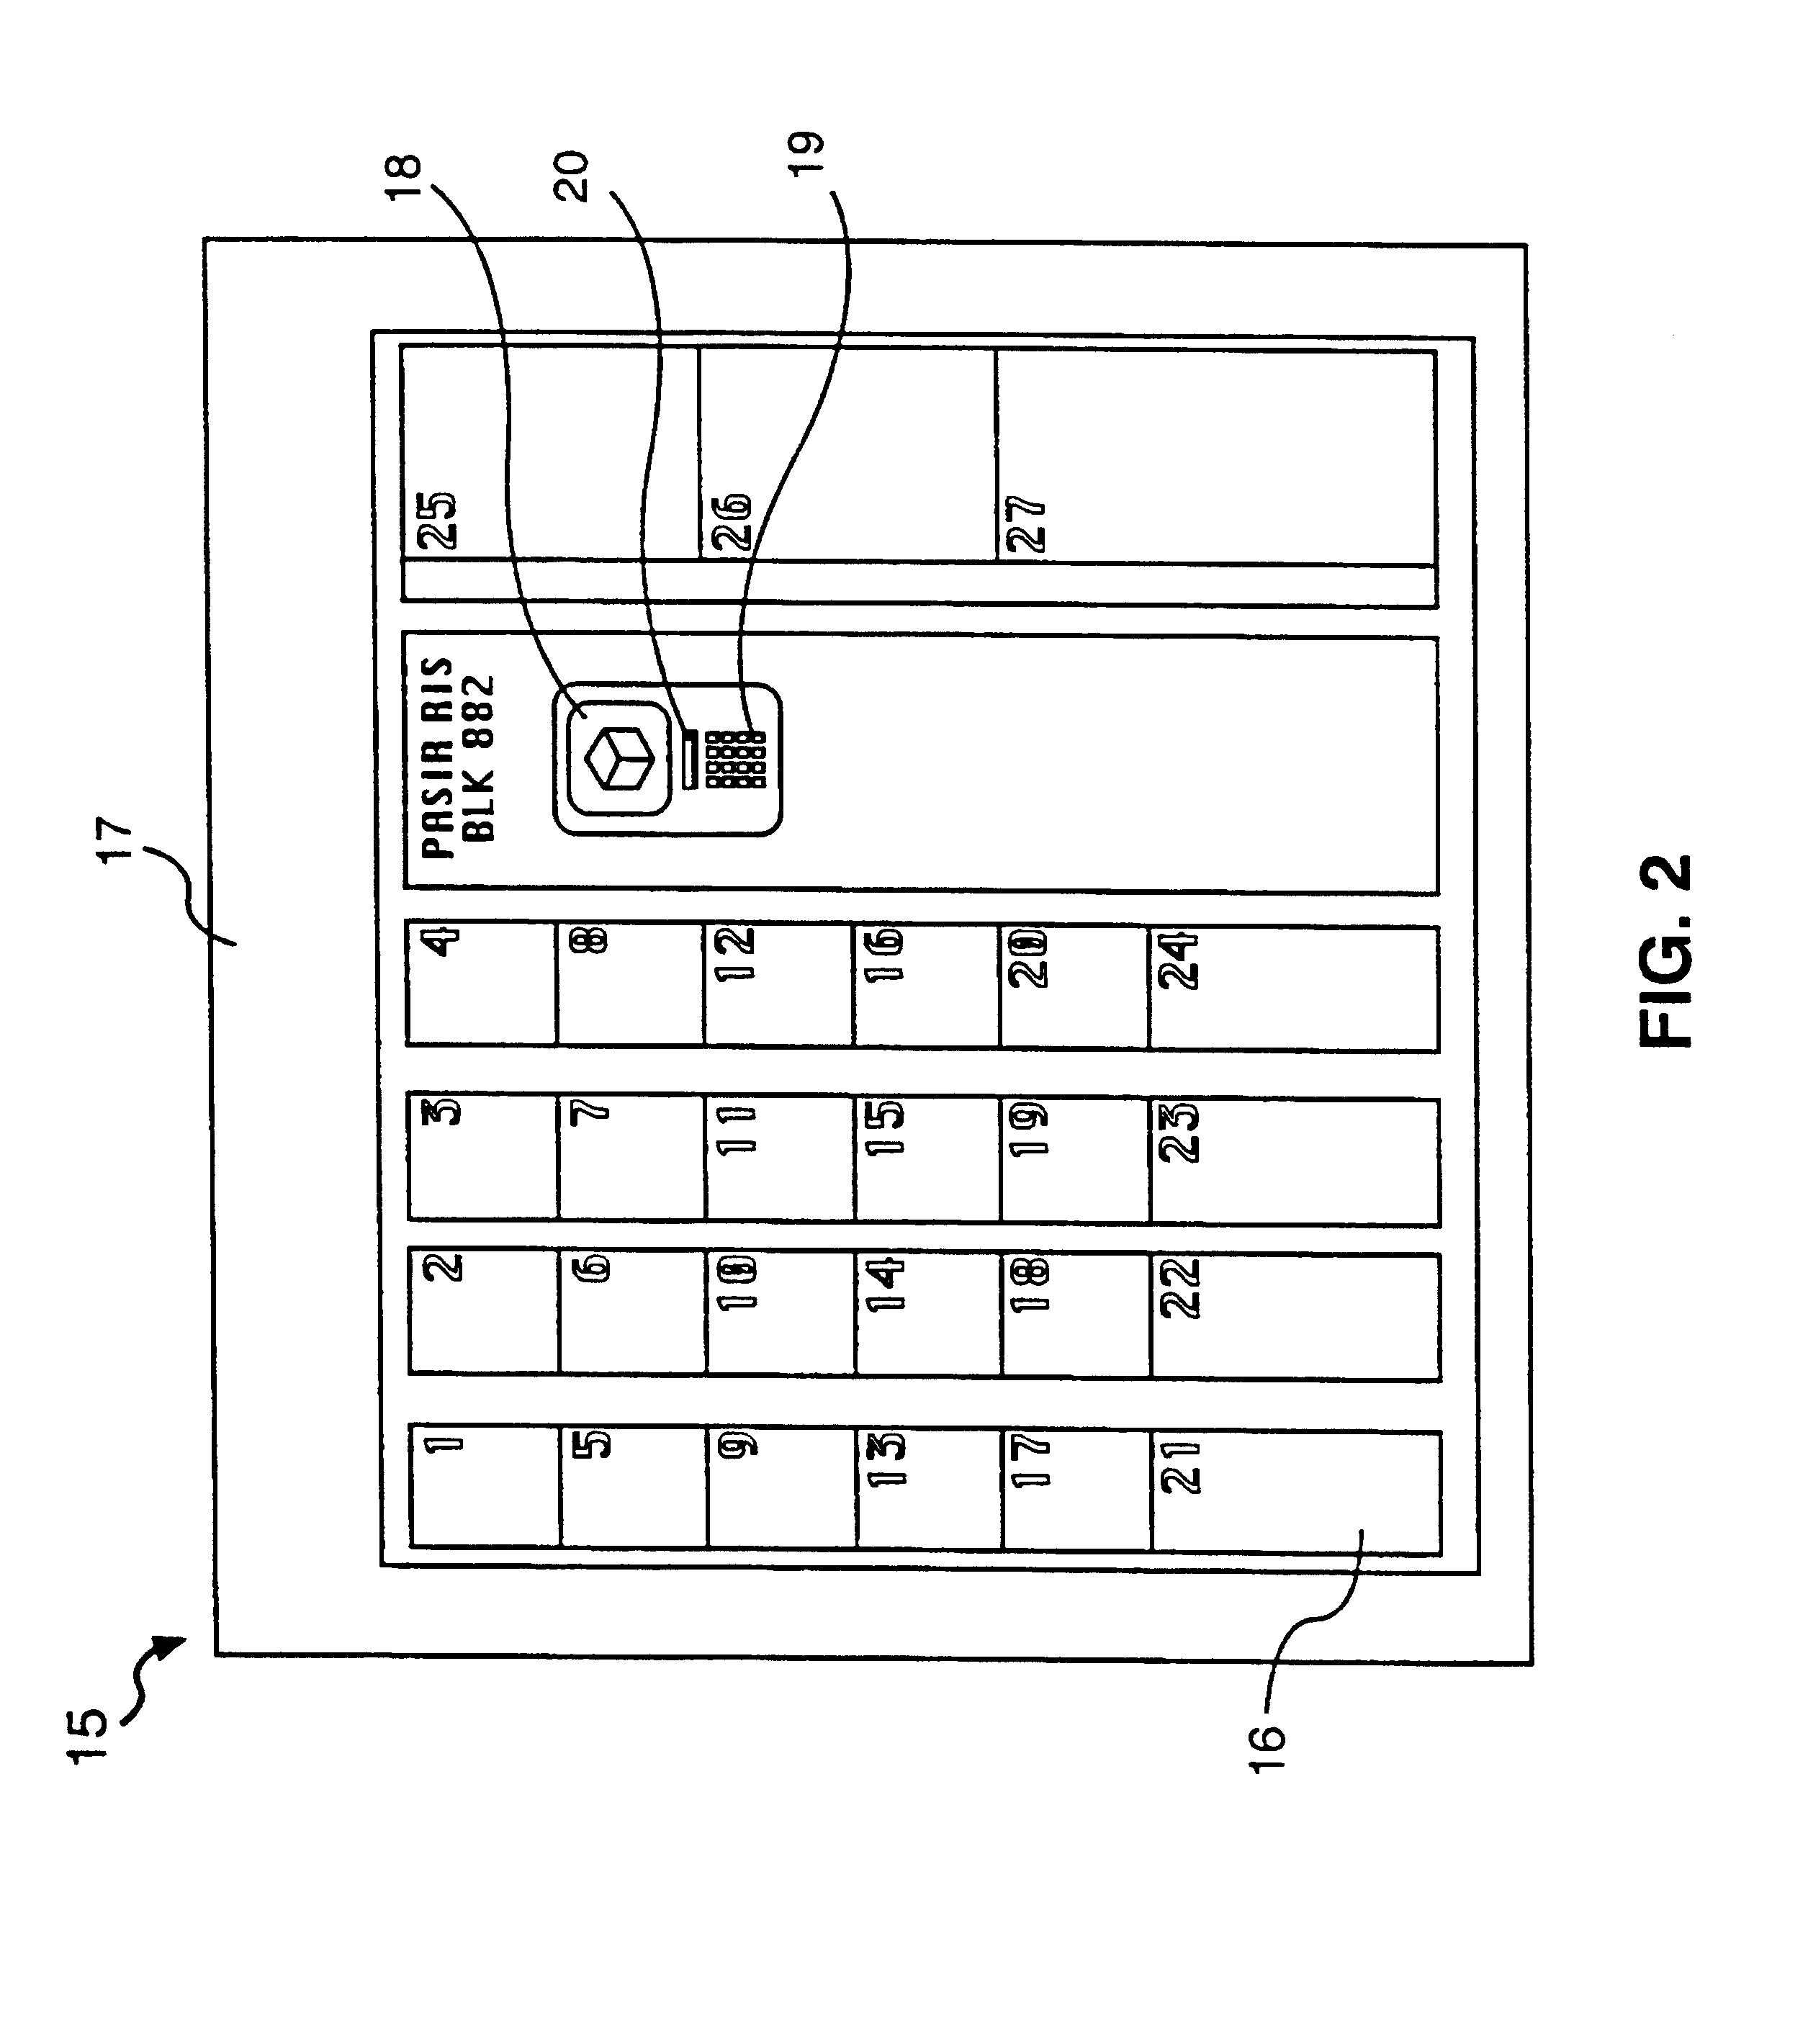 Method and system for facilitating delivery and pickup of goods